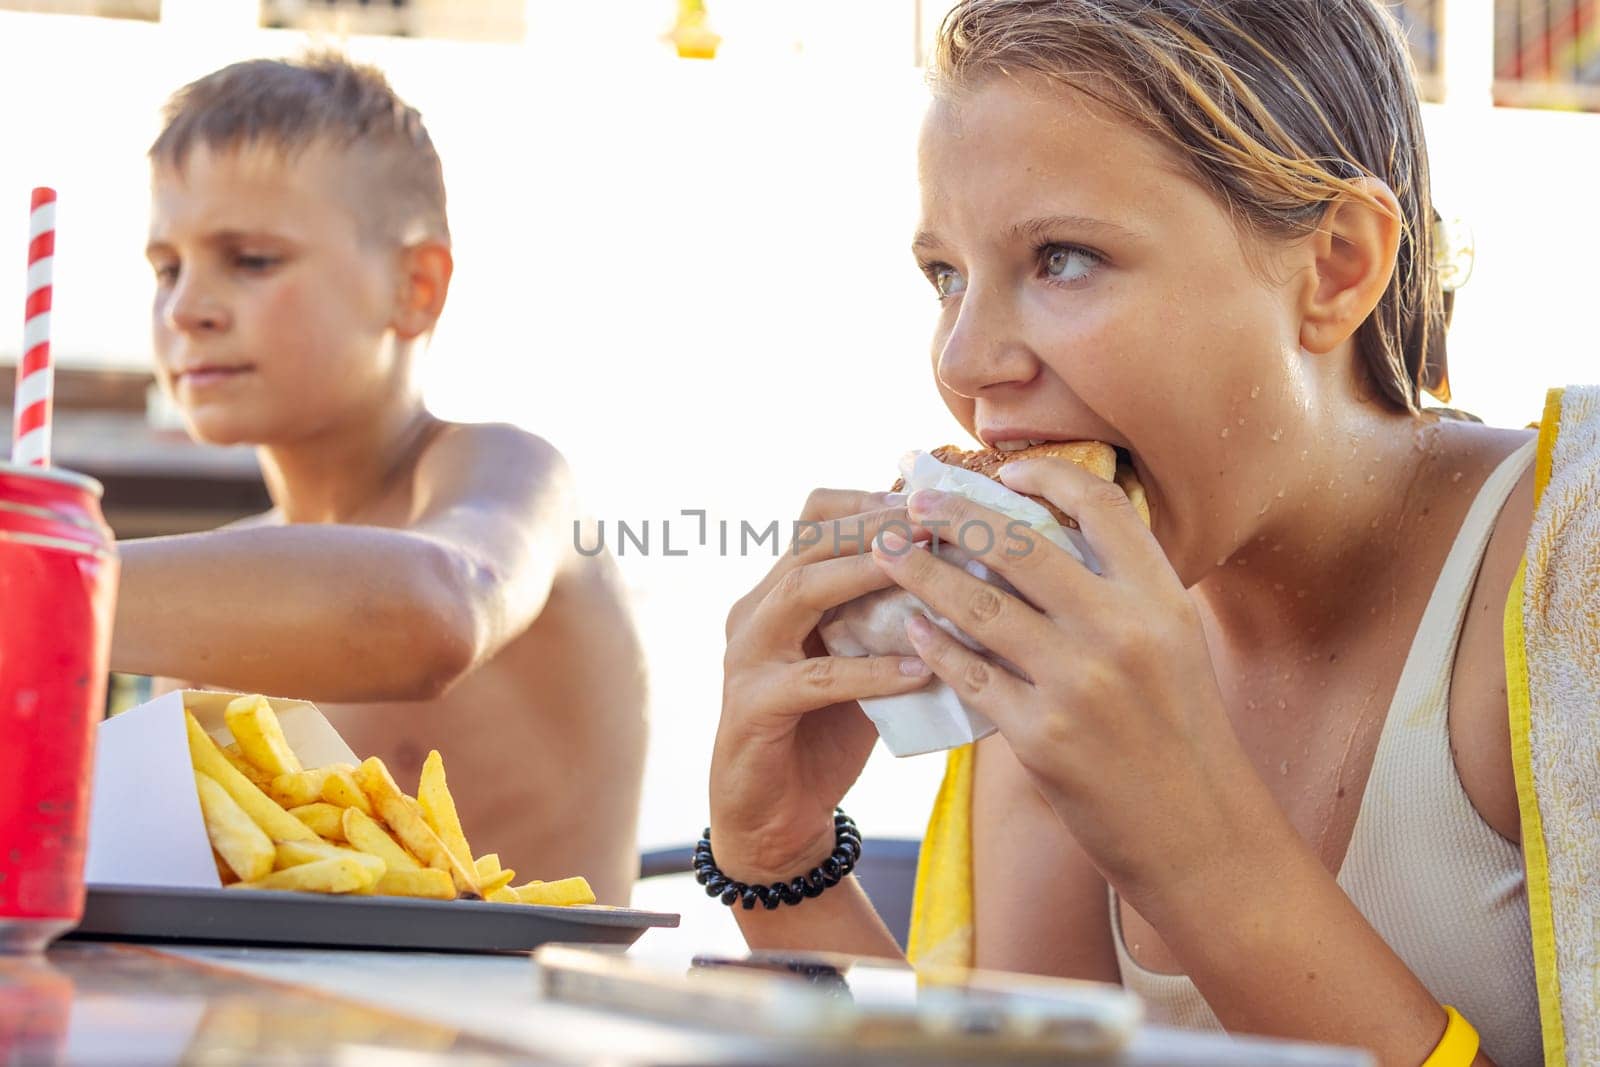 summer holiday concept. Focus on girl, unhealthy food, children eat unhealthy food, fast food by PopOff